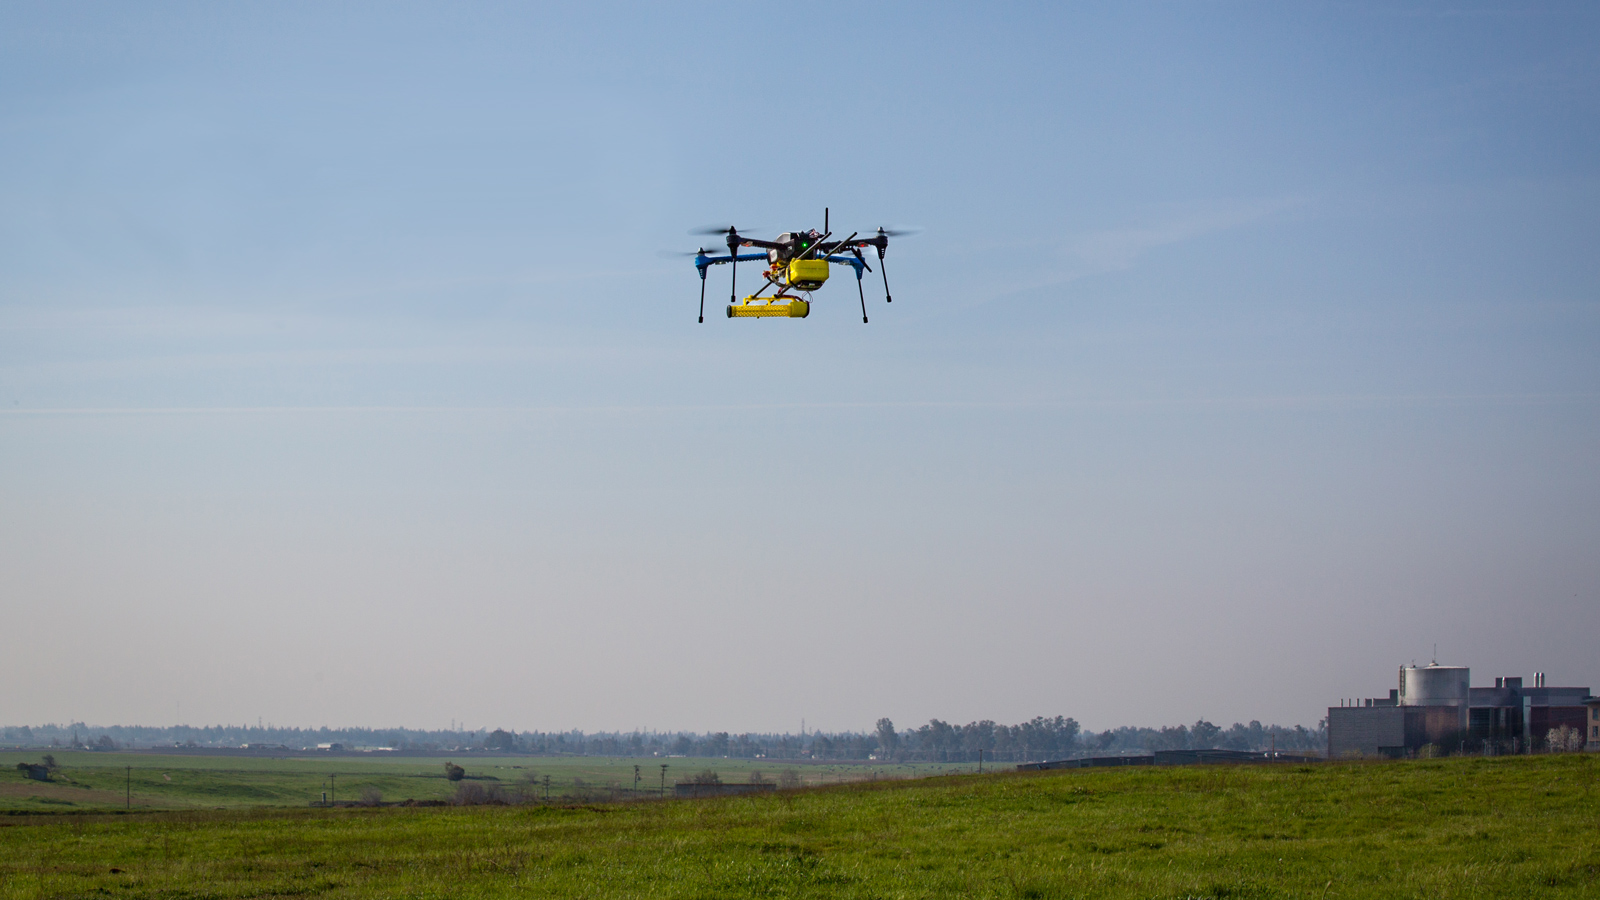 NASA Now Has A Drone That Can Sniff Out Dangerous Gas Leaks